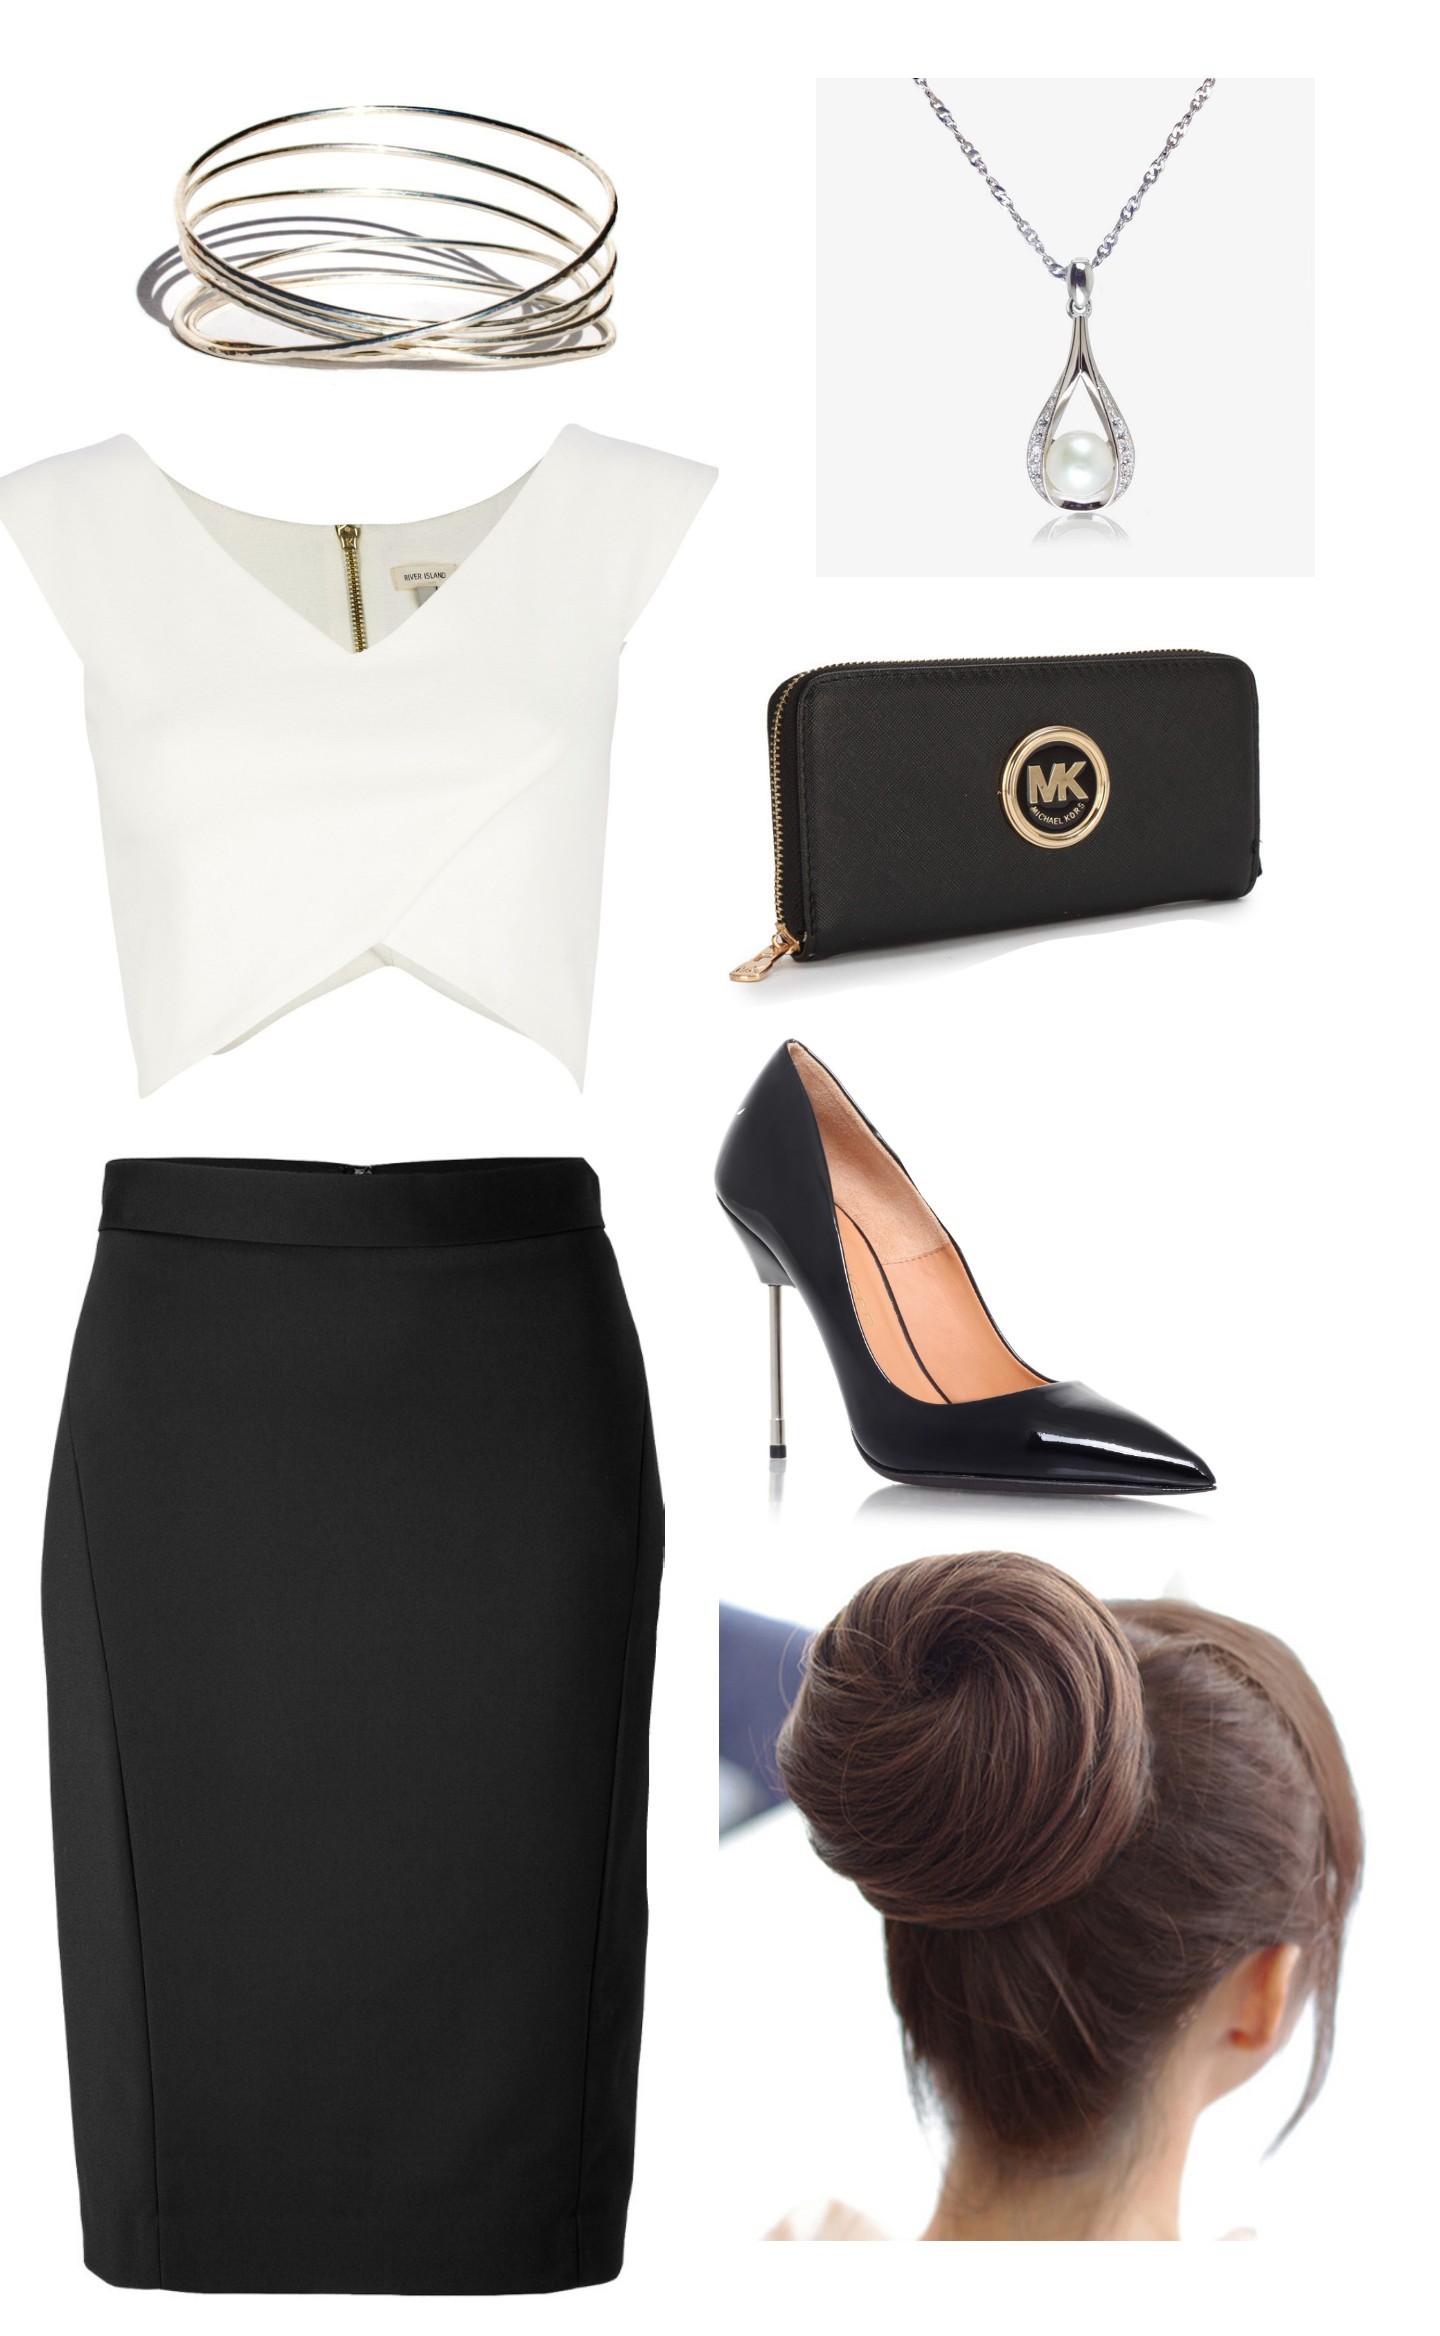 🙋‍♀️Click🙋‍♀️
This is a more professional outfit, like a busines women outfit 